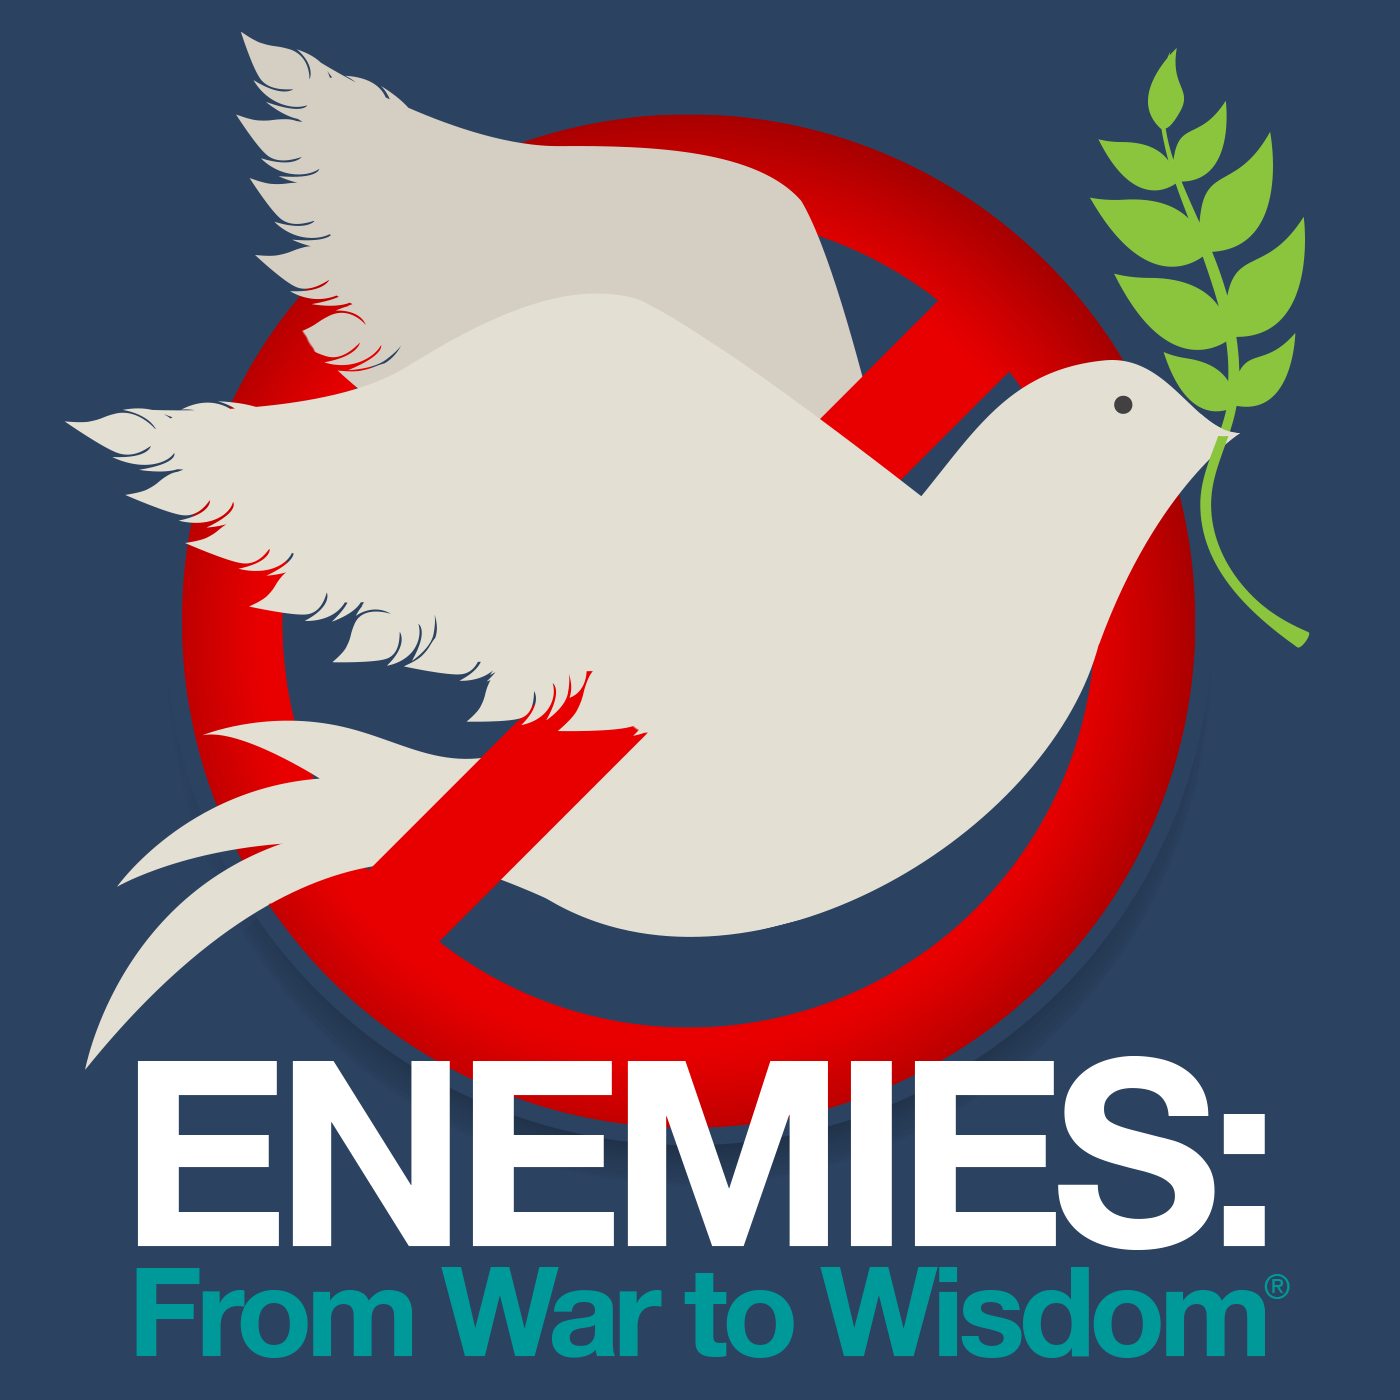 ENEMIES: From War to Wisdom Episode 21: Free Will and Wisdom: the Ten Commandments, the Five Precepts, and the Golden Rule